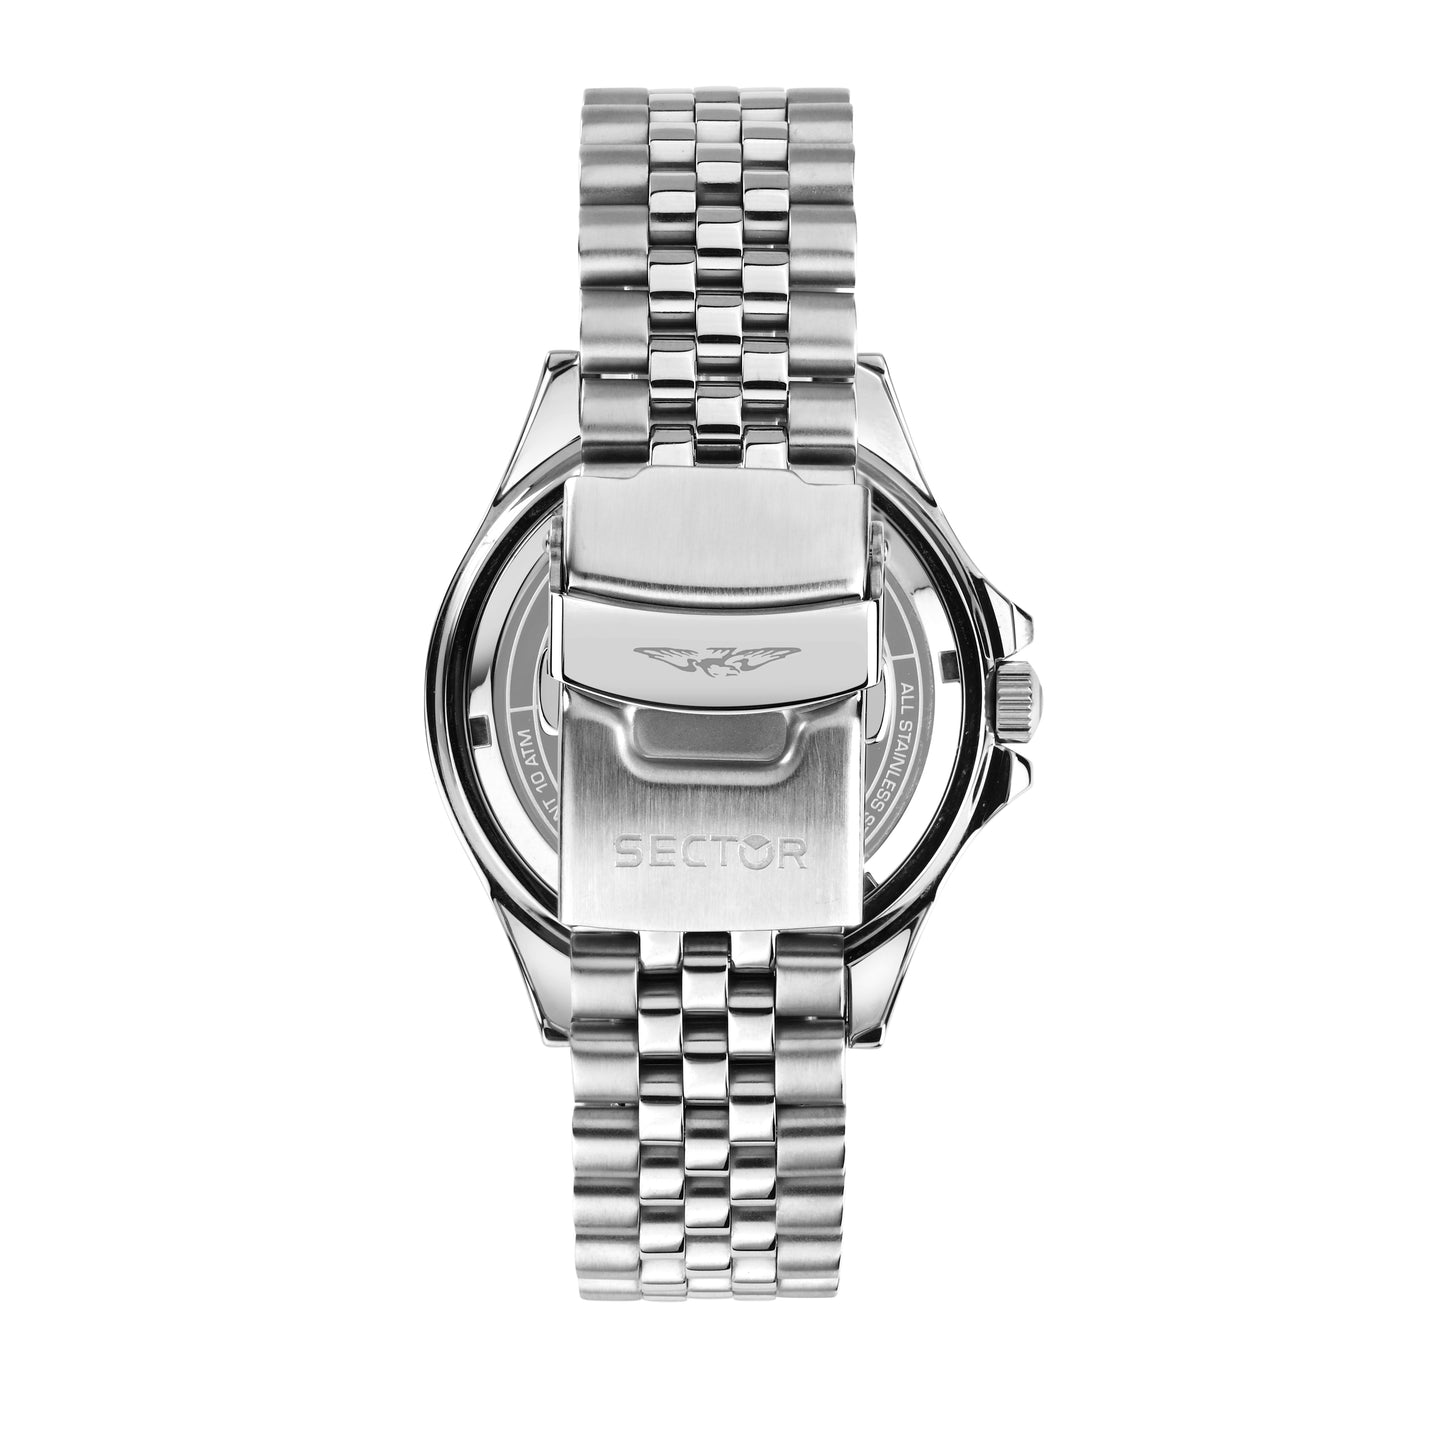 MONTRE HOMME SECTOR 230 R3223161016